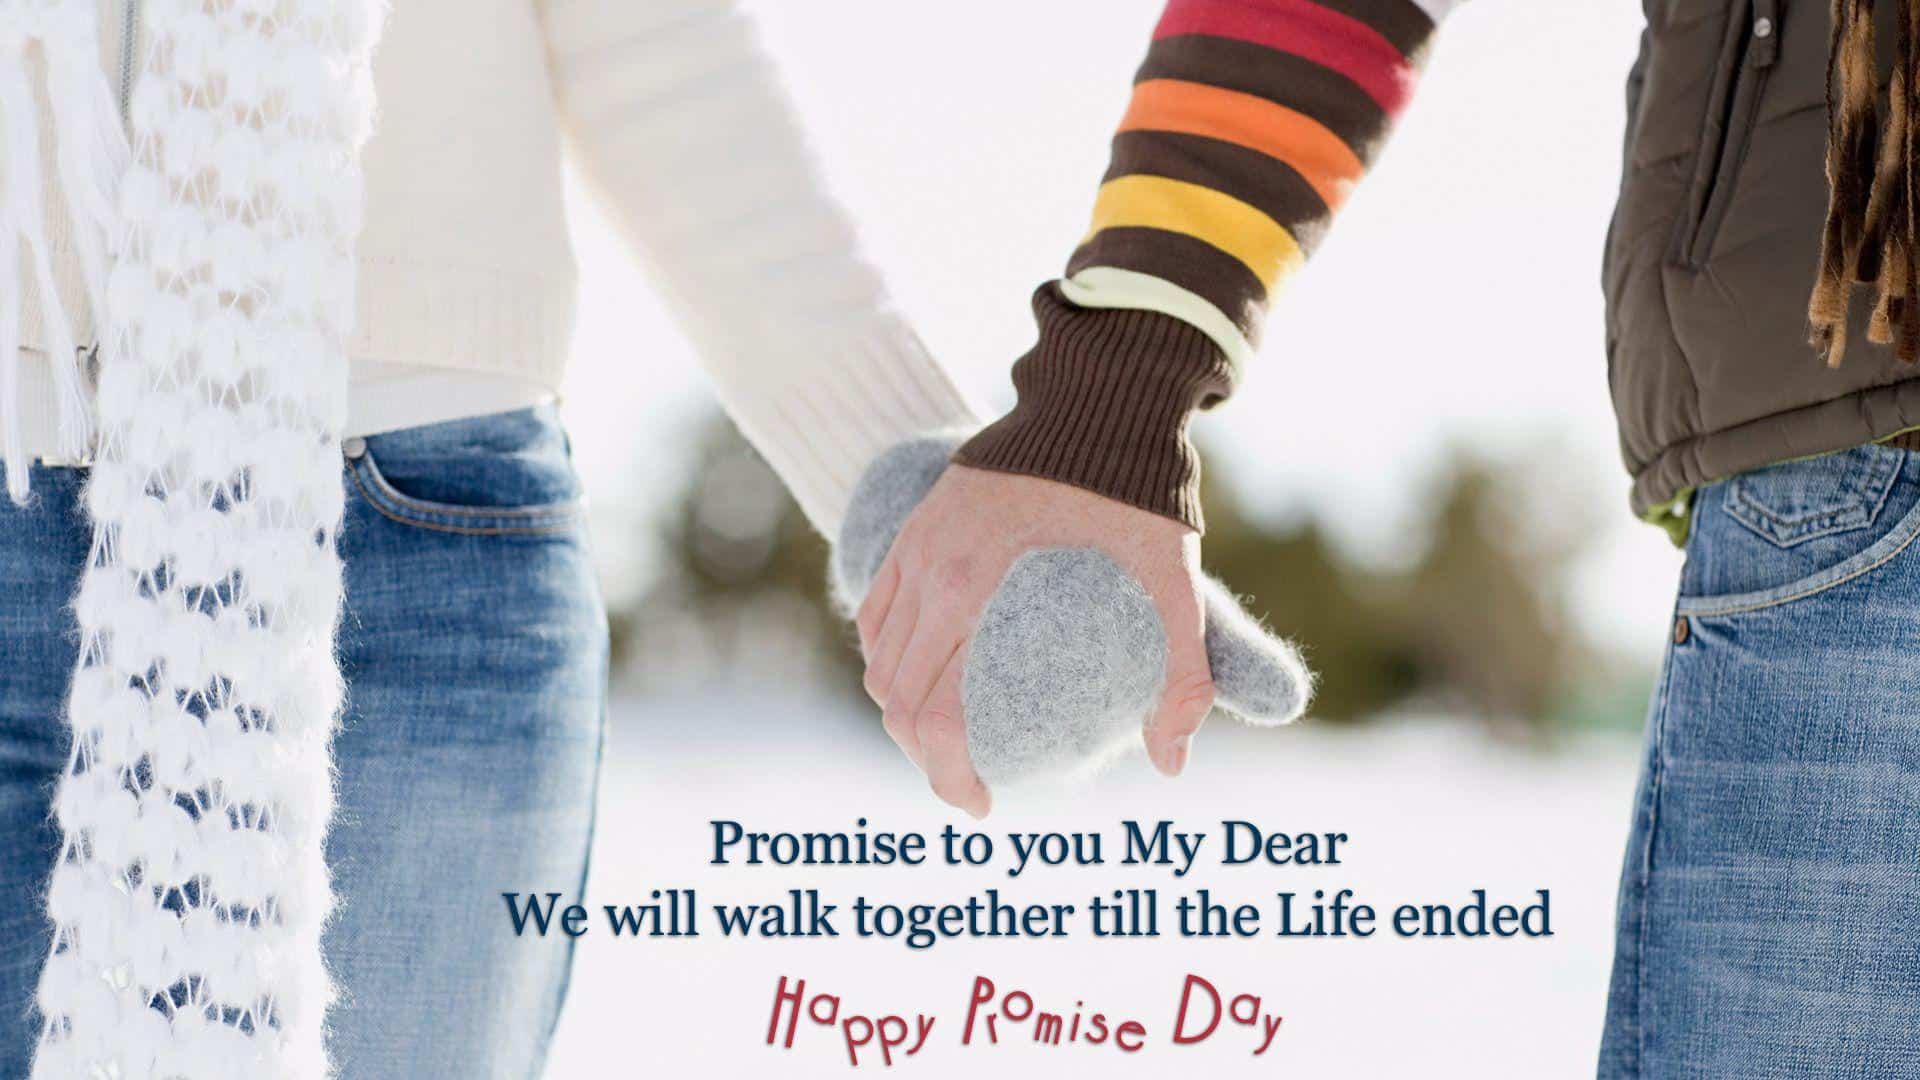 Happy Promise Day Images